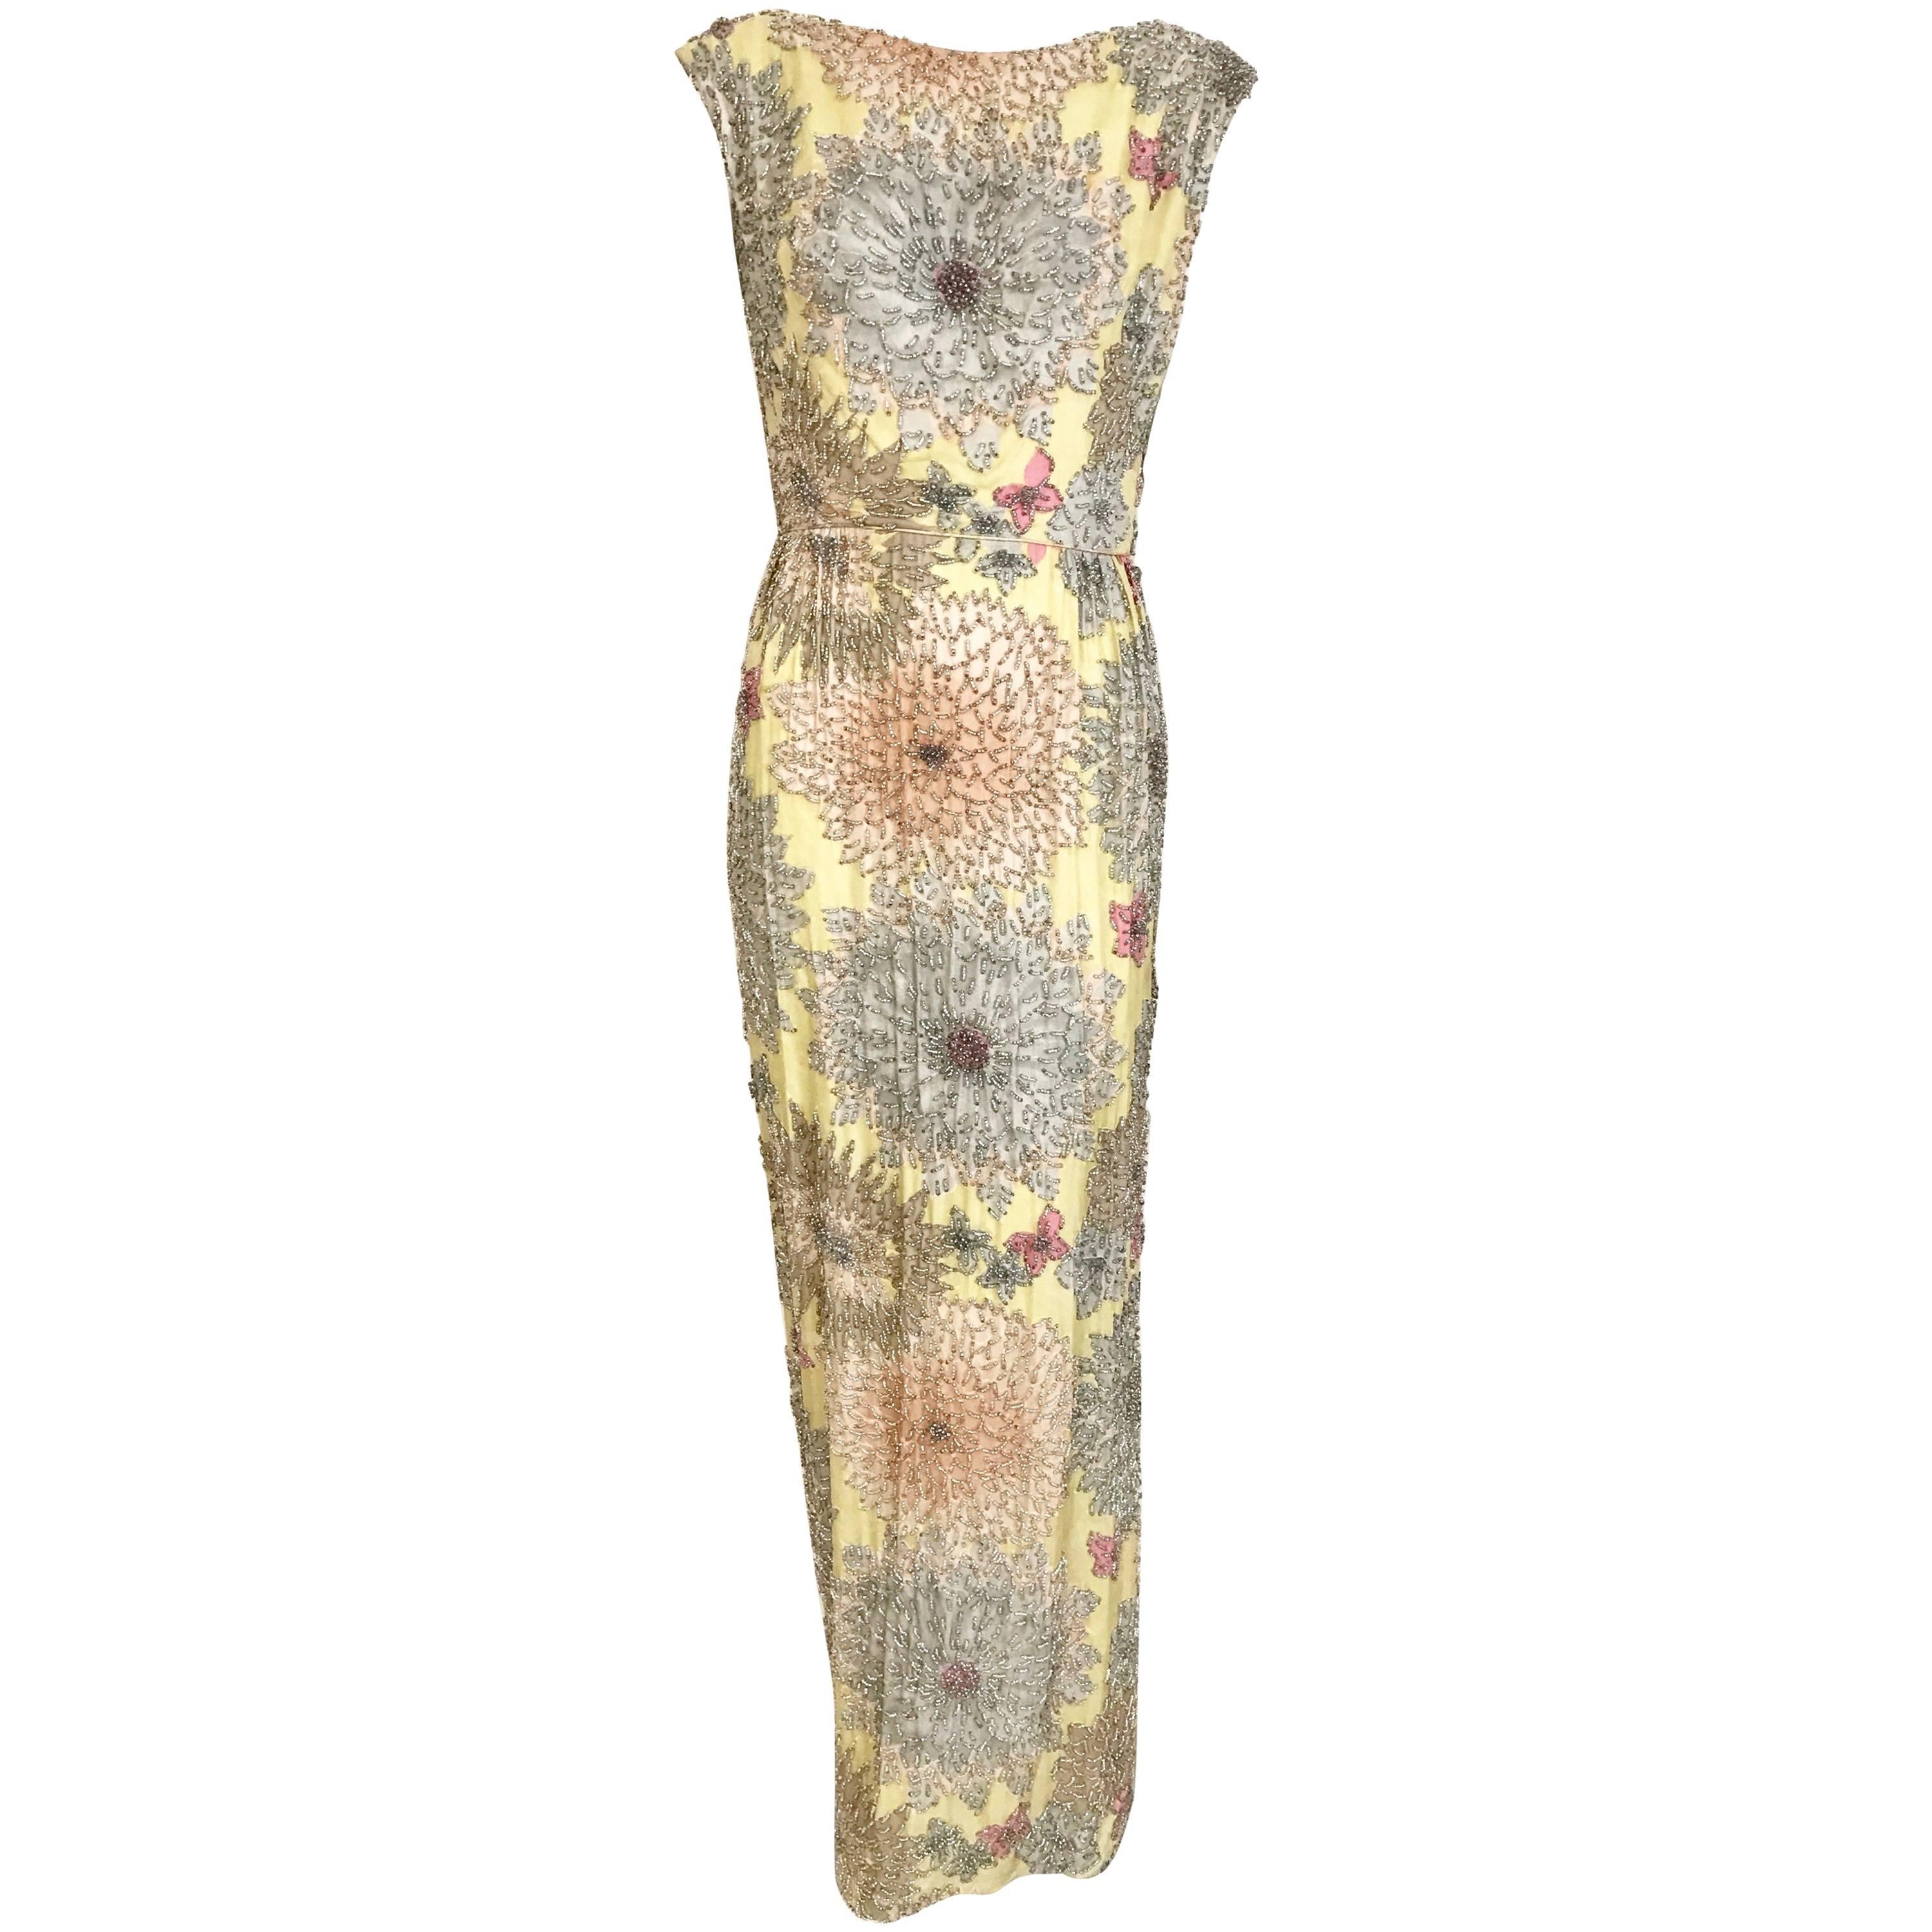 Vintage Malcolm Starr 1960s Yellow Floral Beaded Sleeveless Dress